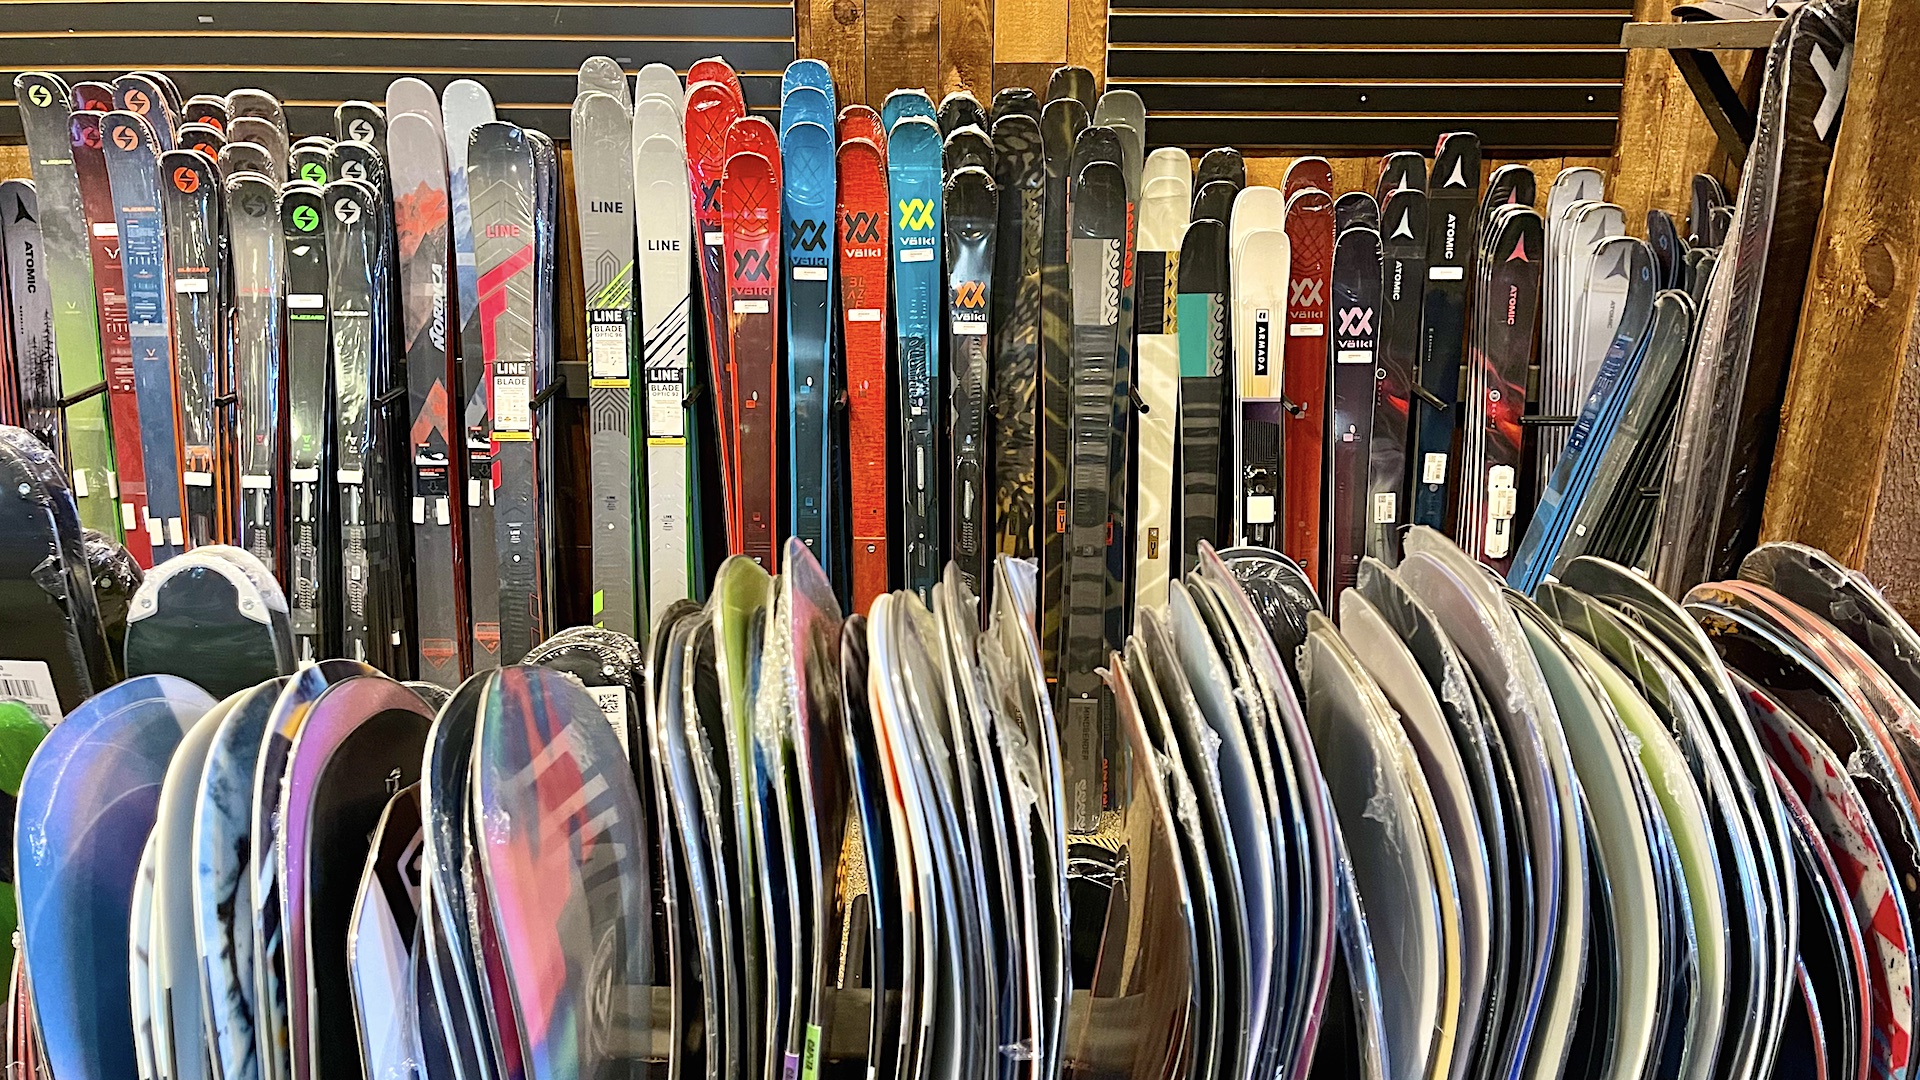 Skis and Snowboards at Snow Trails Ski Shop Mansfield, Ohio